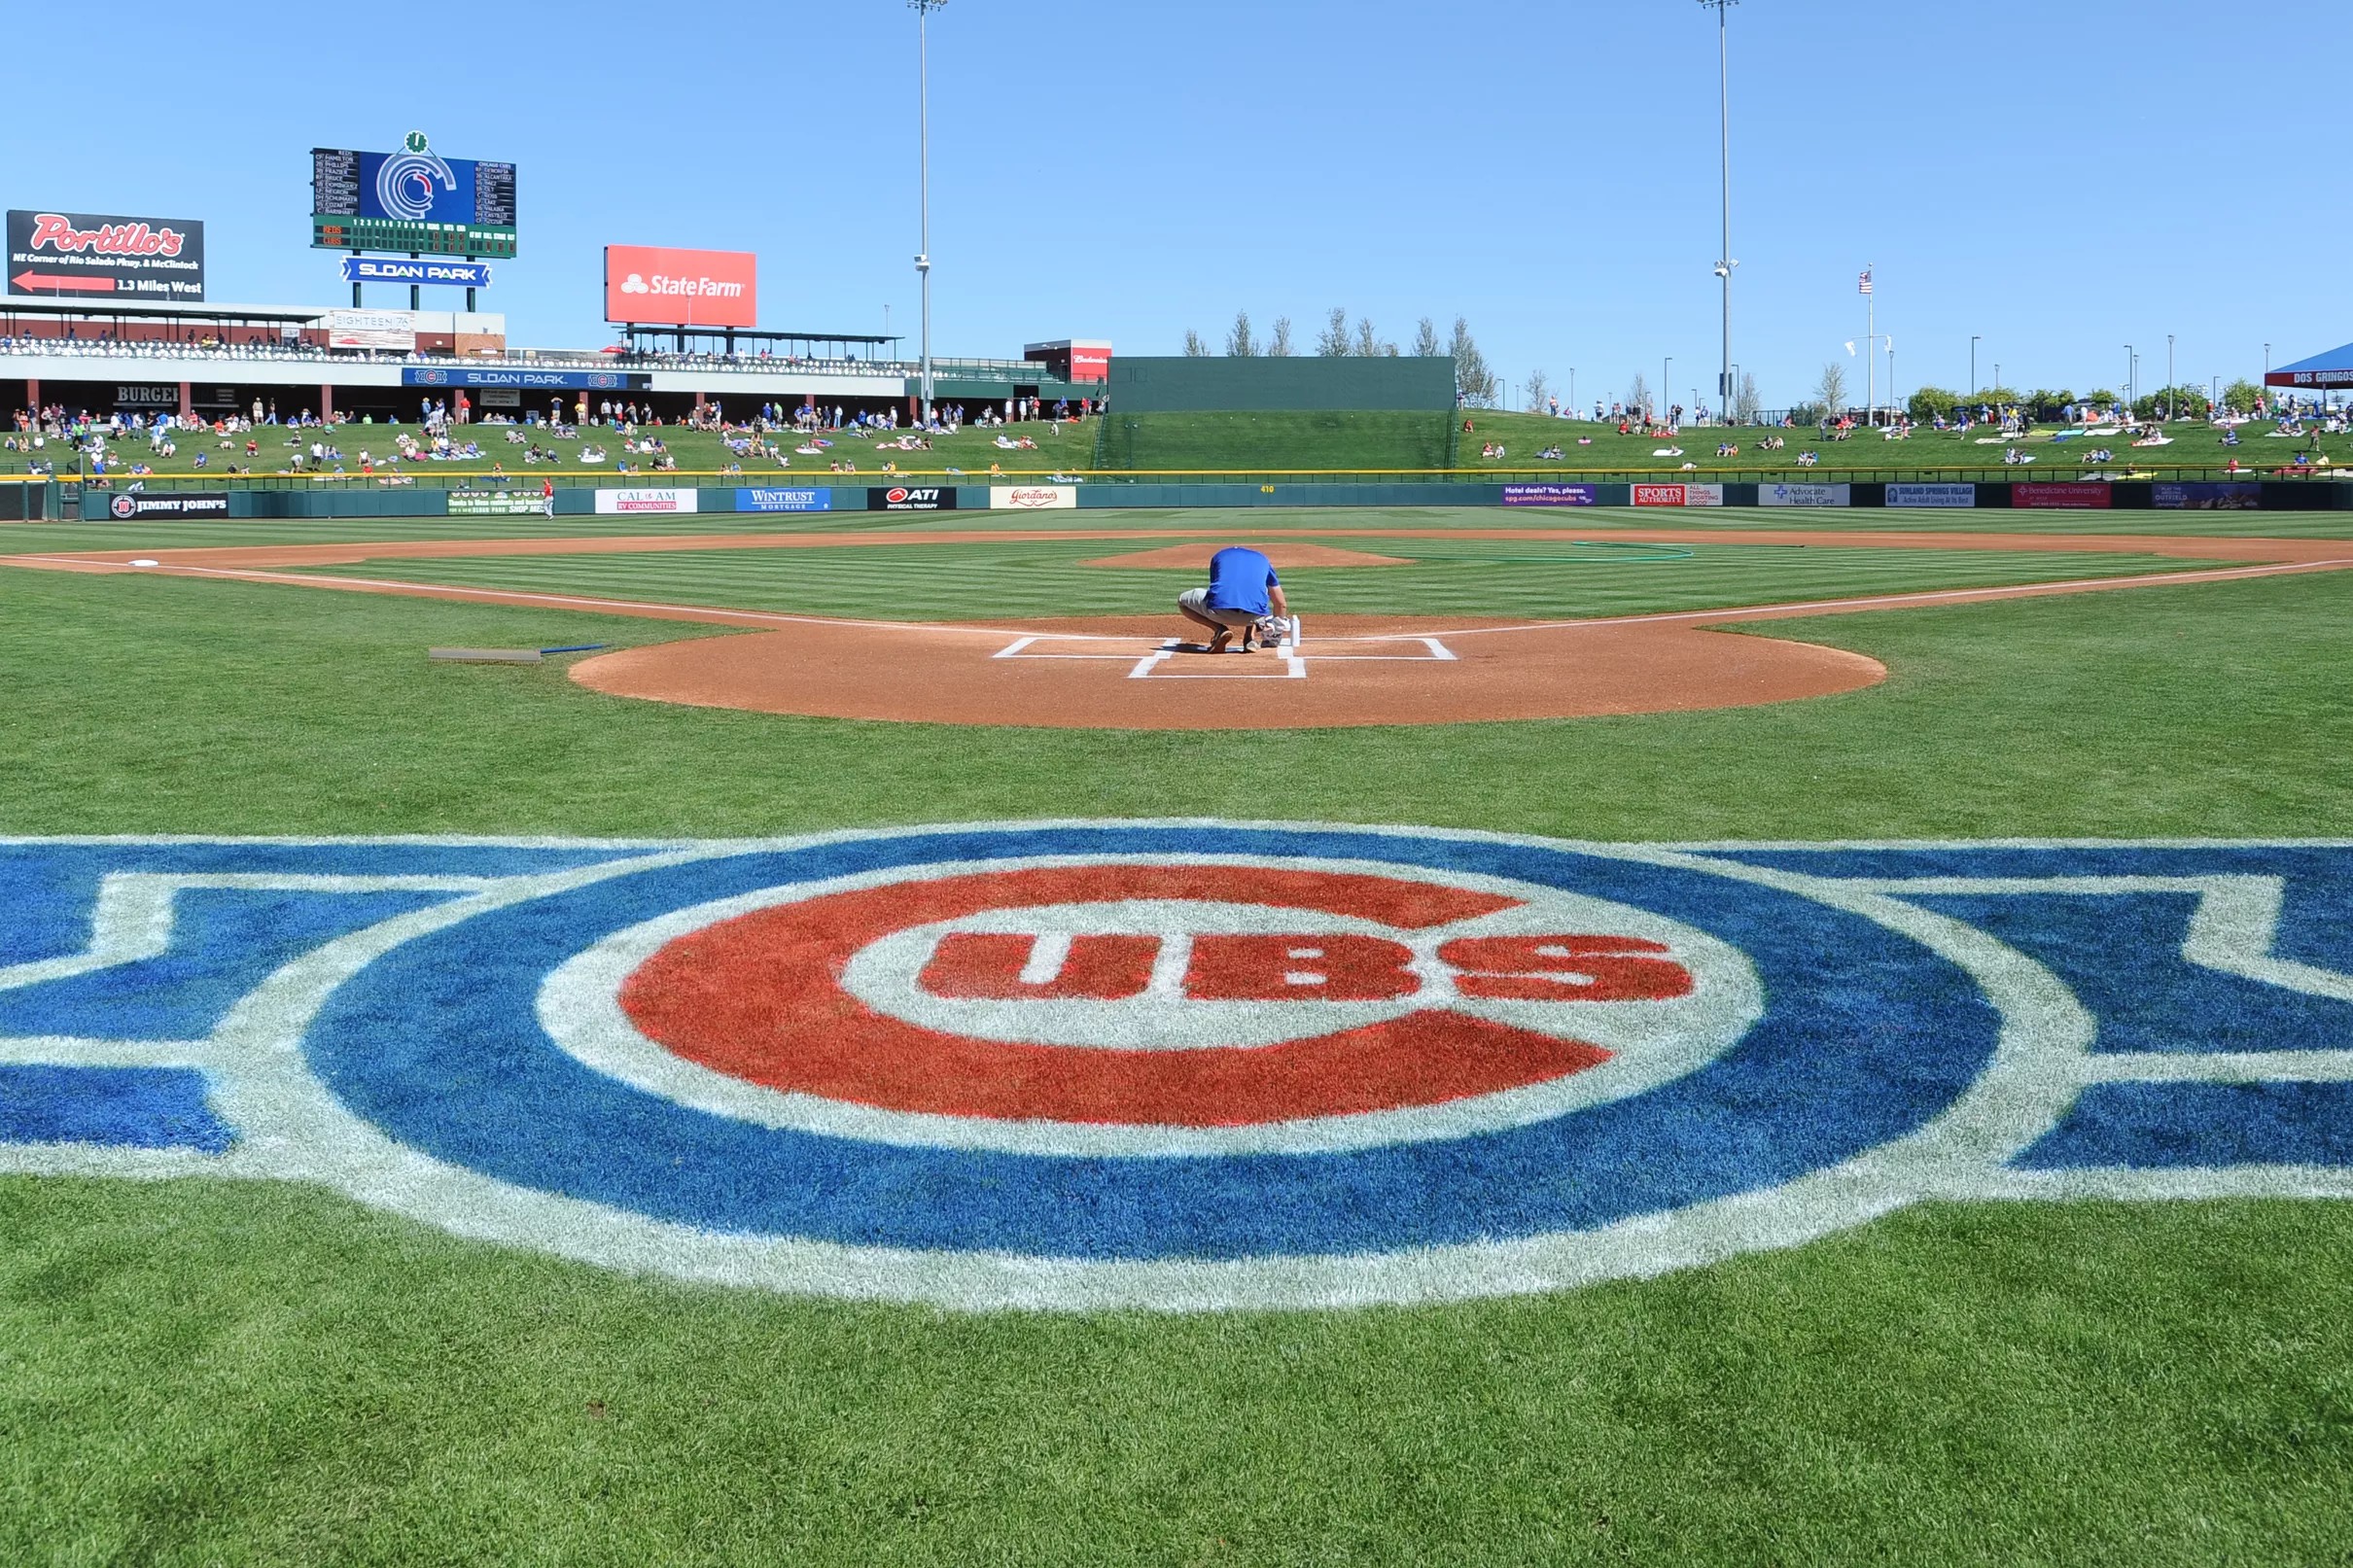 cubs-spring-training-tickets-on-sale-saturday